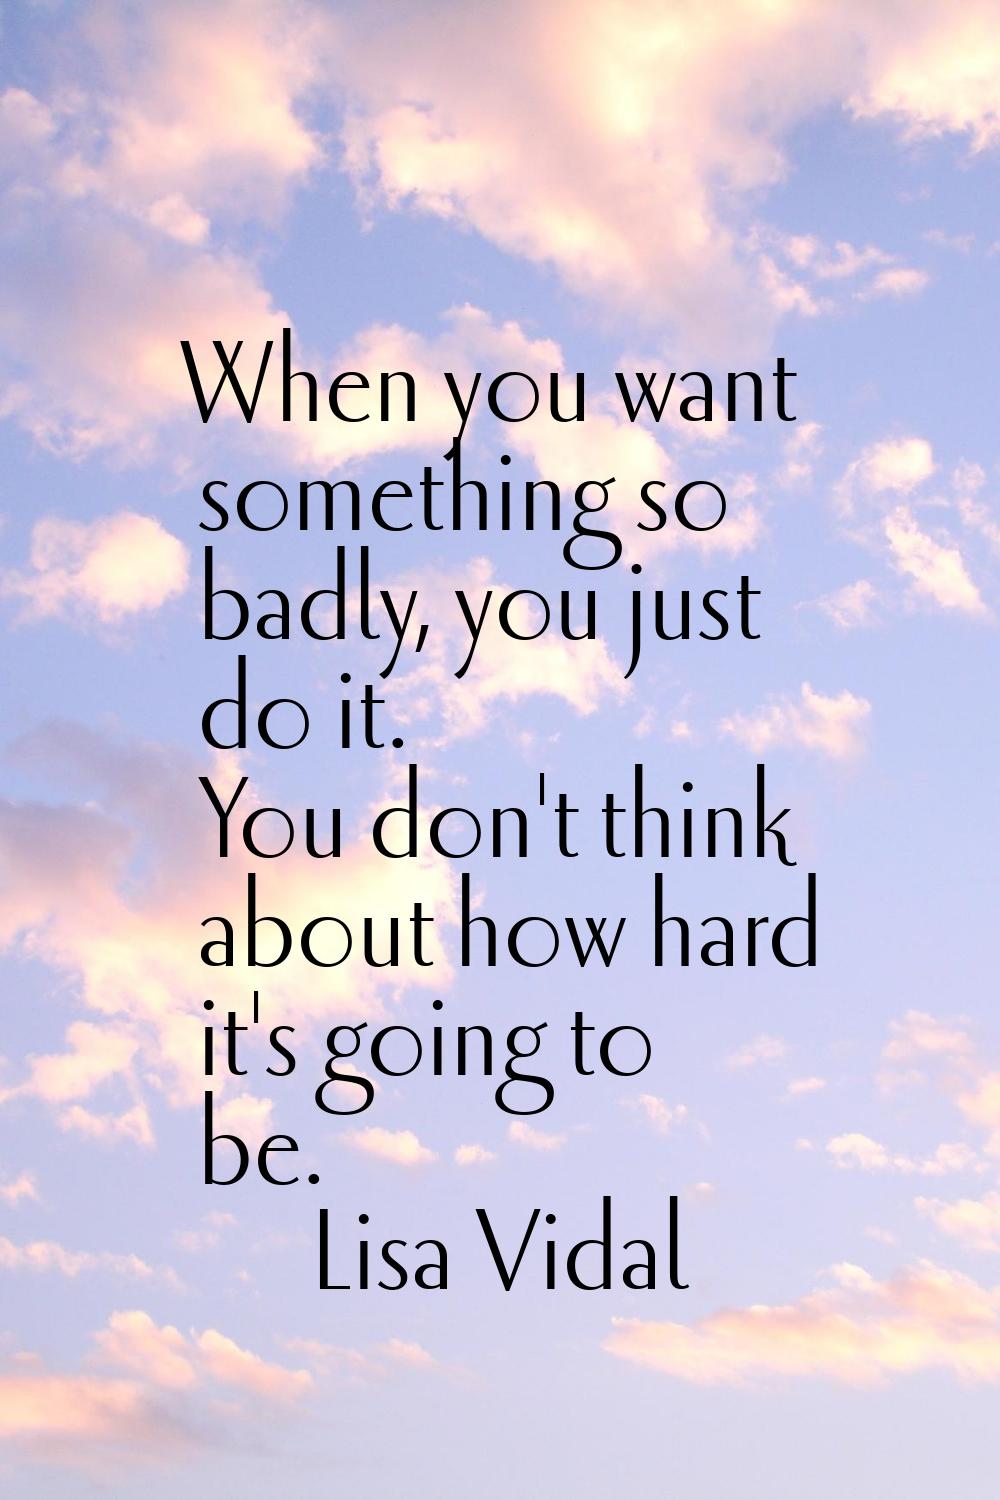 When you want something so badly, you just do it. You don't think about how hard it's going to be.